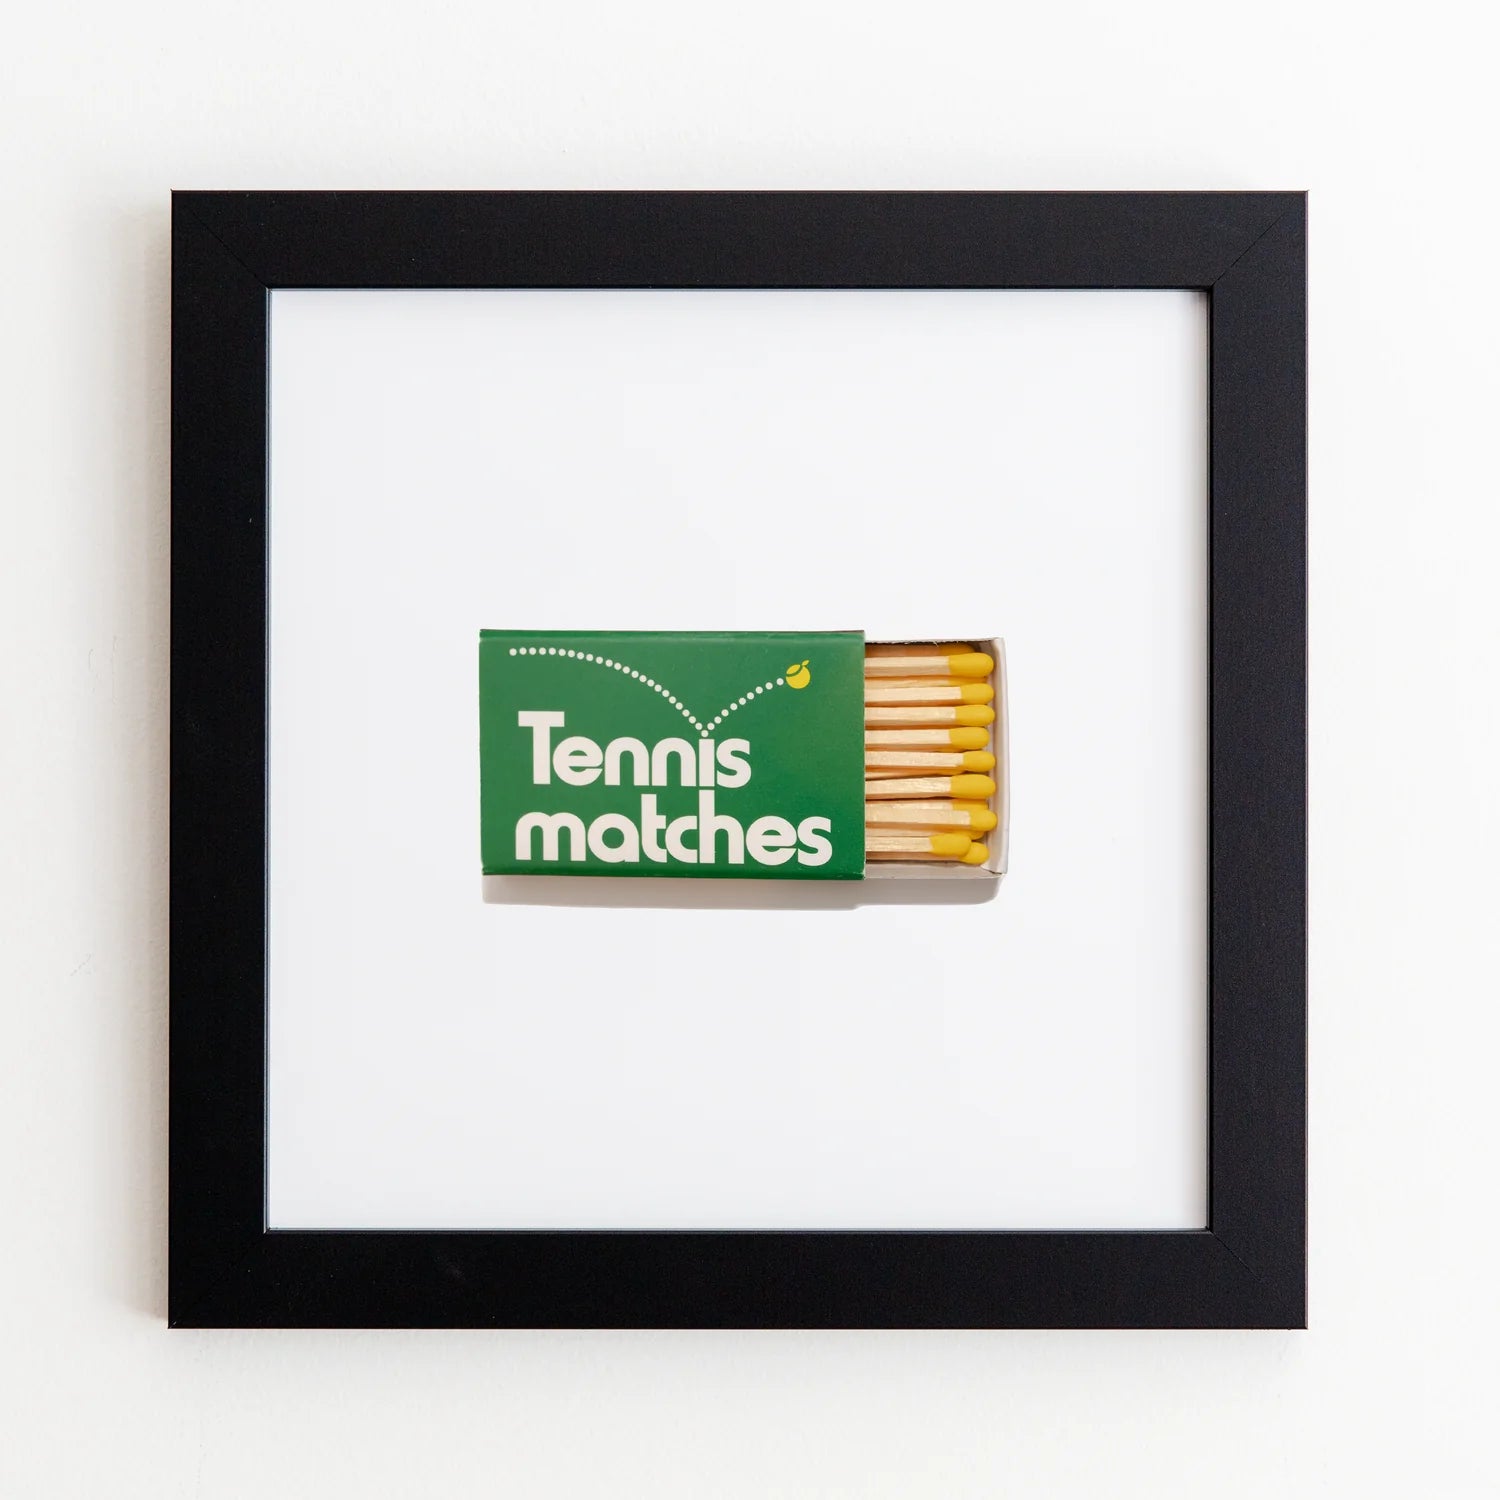 A book of green &quot;Tennis matches&quot; matches with some sticks visible is displayed in an Art Square Black Frame artwork on a white background by Match South.